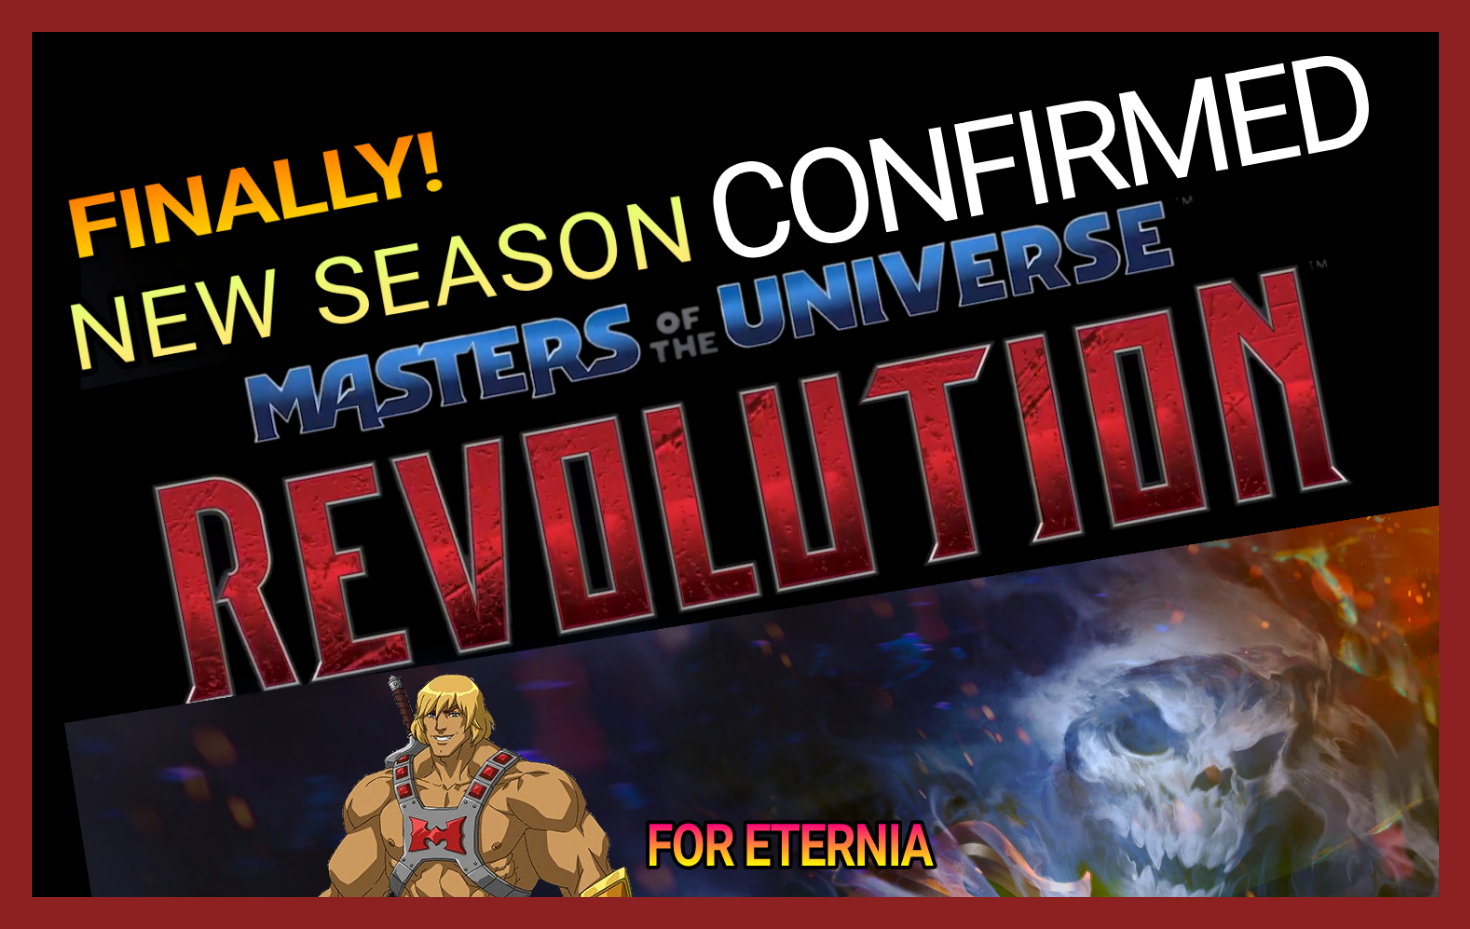 New Revelation Sequel Confirmed titled MASTERS OF THE UNIVERSE: REVOLUTION! We discuss the news!